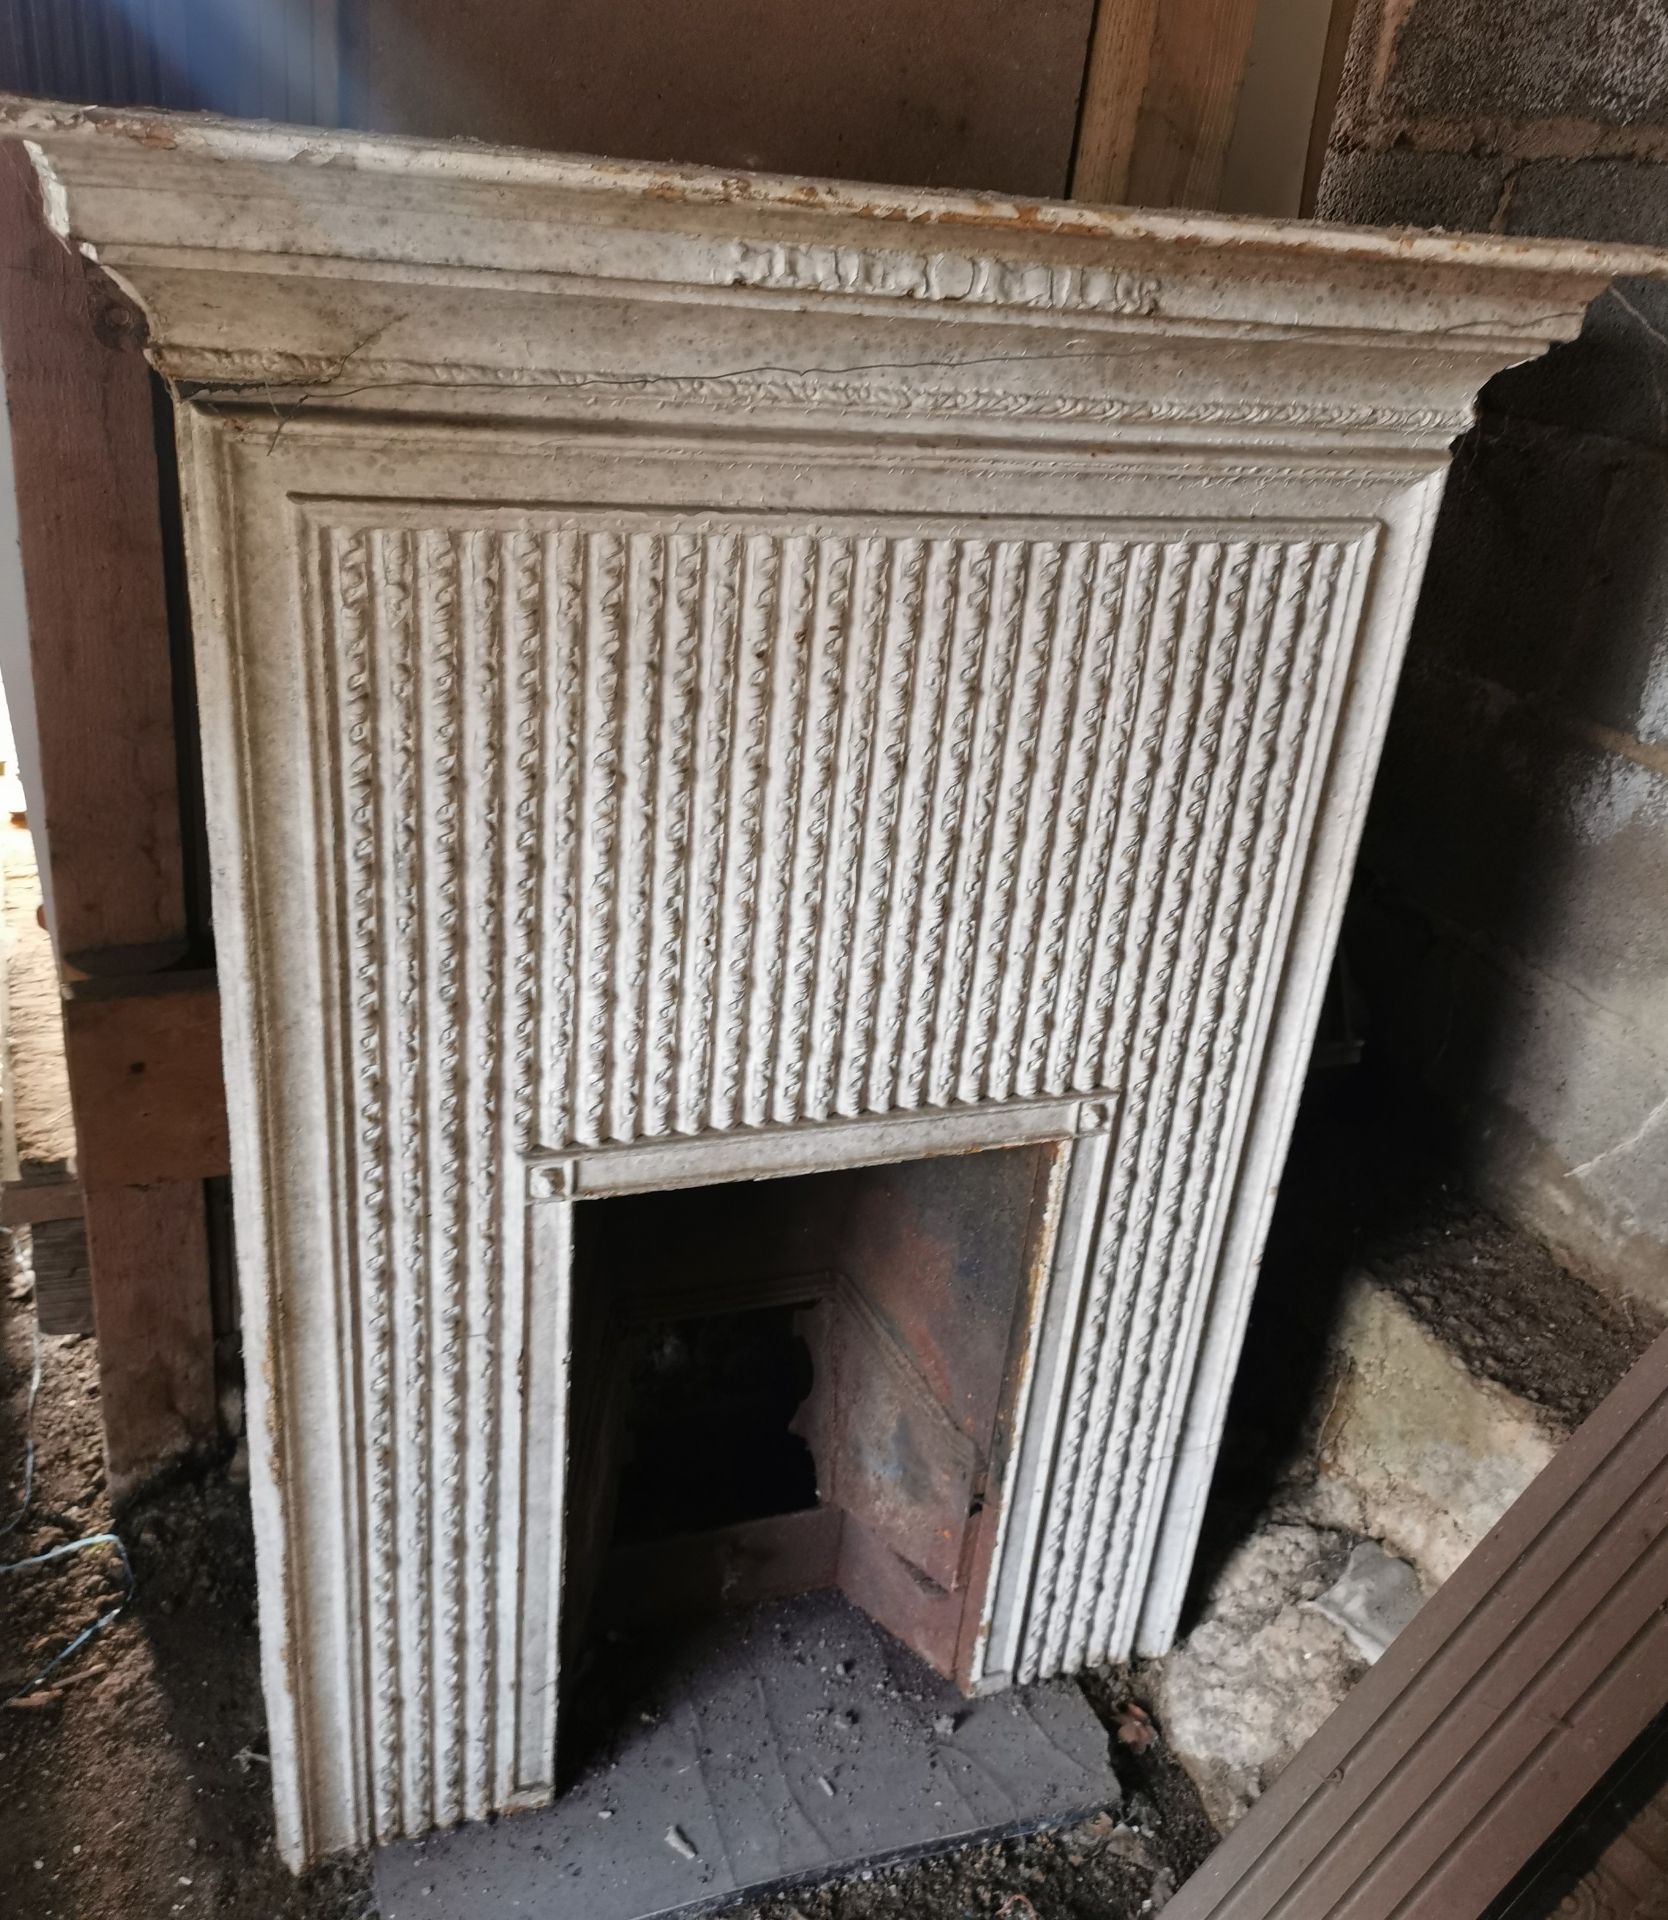 Fire Place Surround